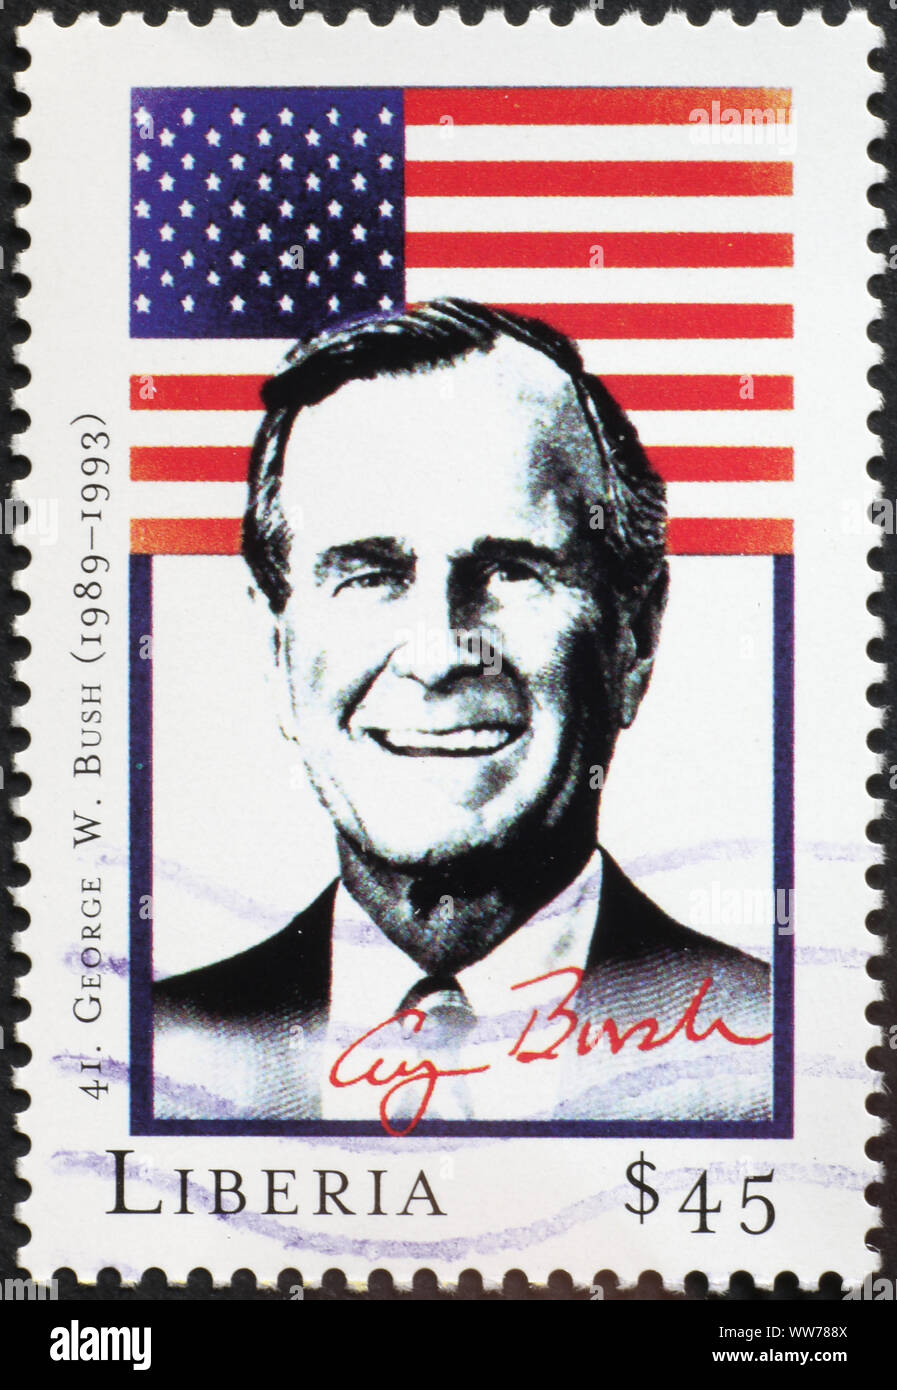 President George W. Bush and flag on postage stamp Stock Photo